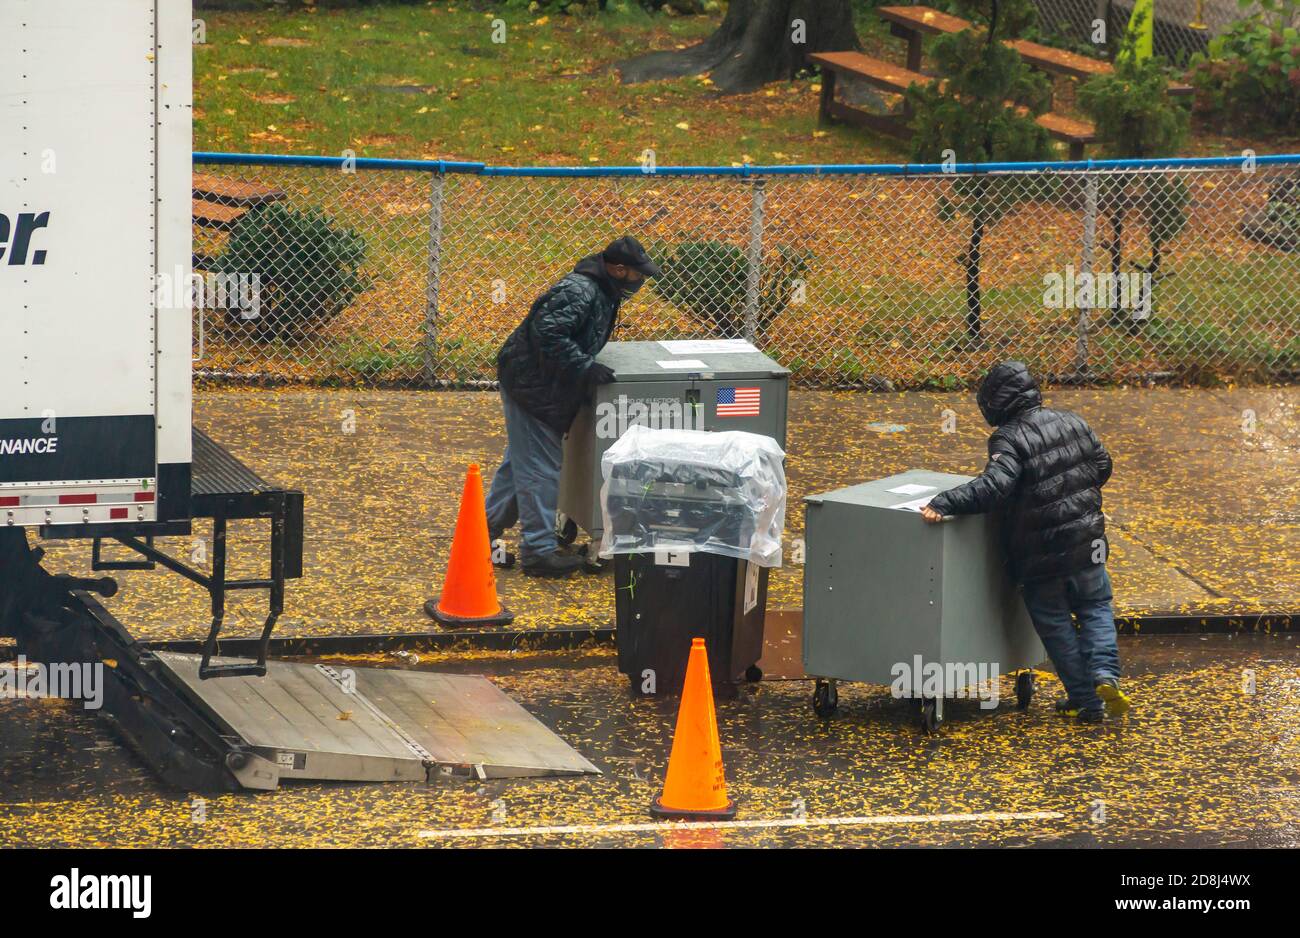 Workers for the New York City Board of Elections deliver scanners and other equipment to the PS33 polling site in Chelsea in New York on a wet Thursday, October 29, 2020 in advance of the November 3 election.  (© Richard B. Levine) Stock Photo